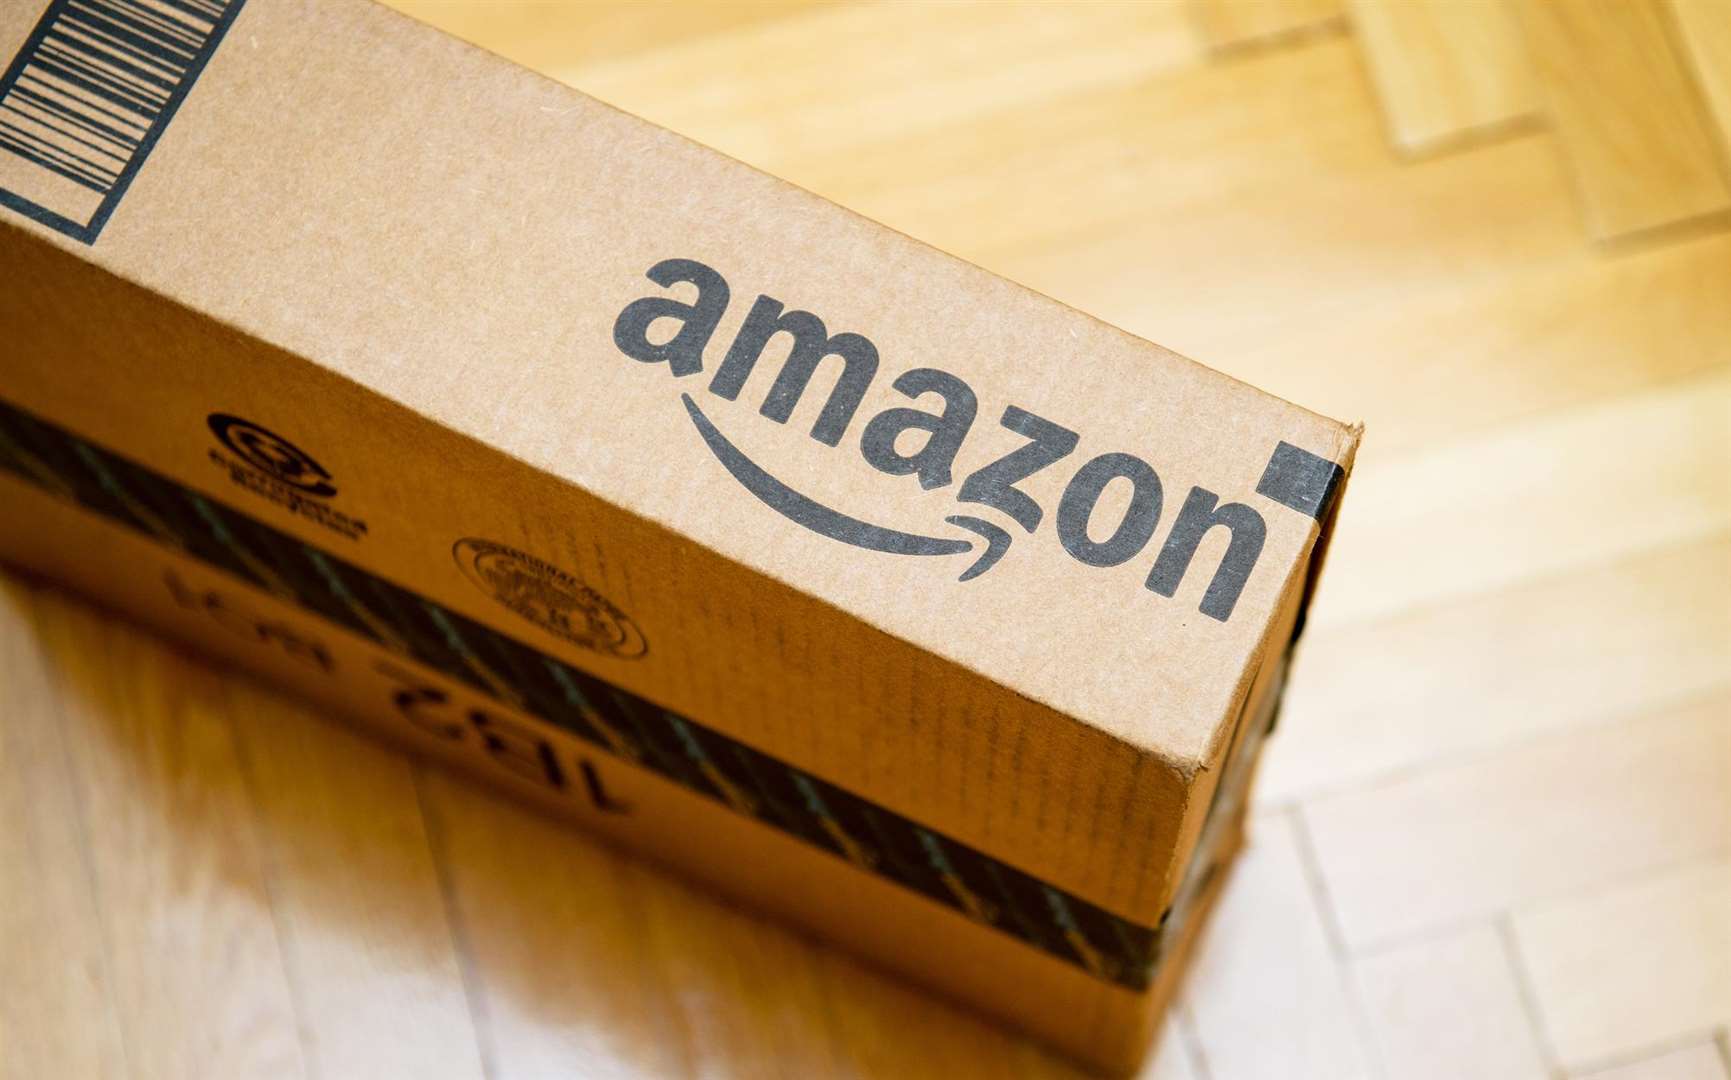 Amazon Prime Day starts at noon on Monday, July 16